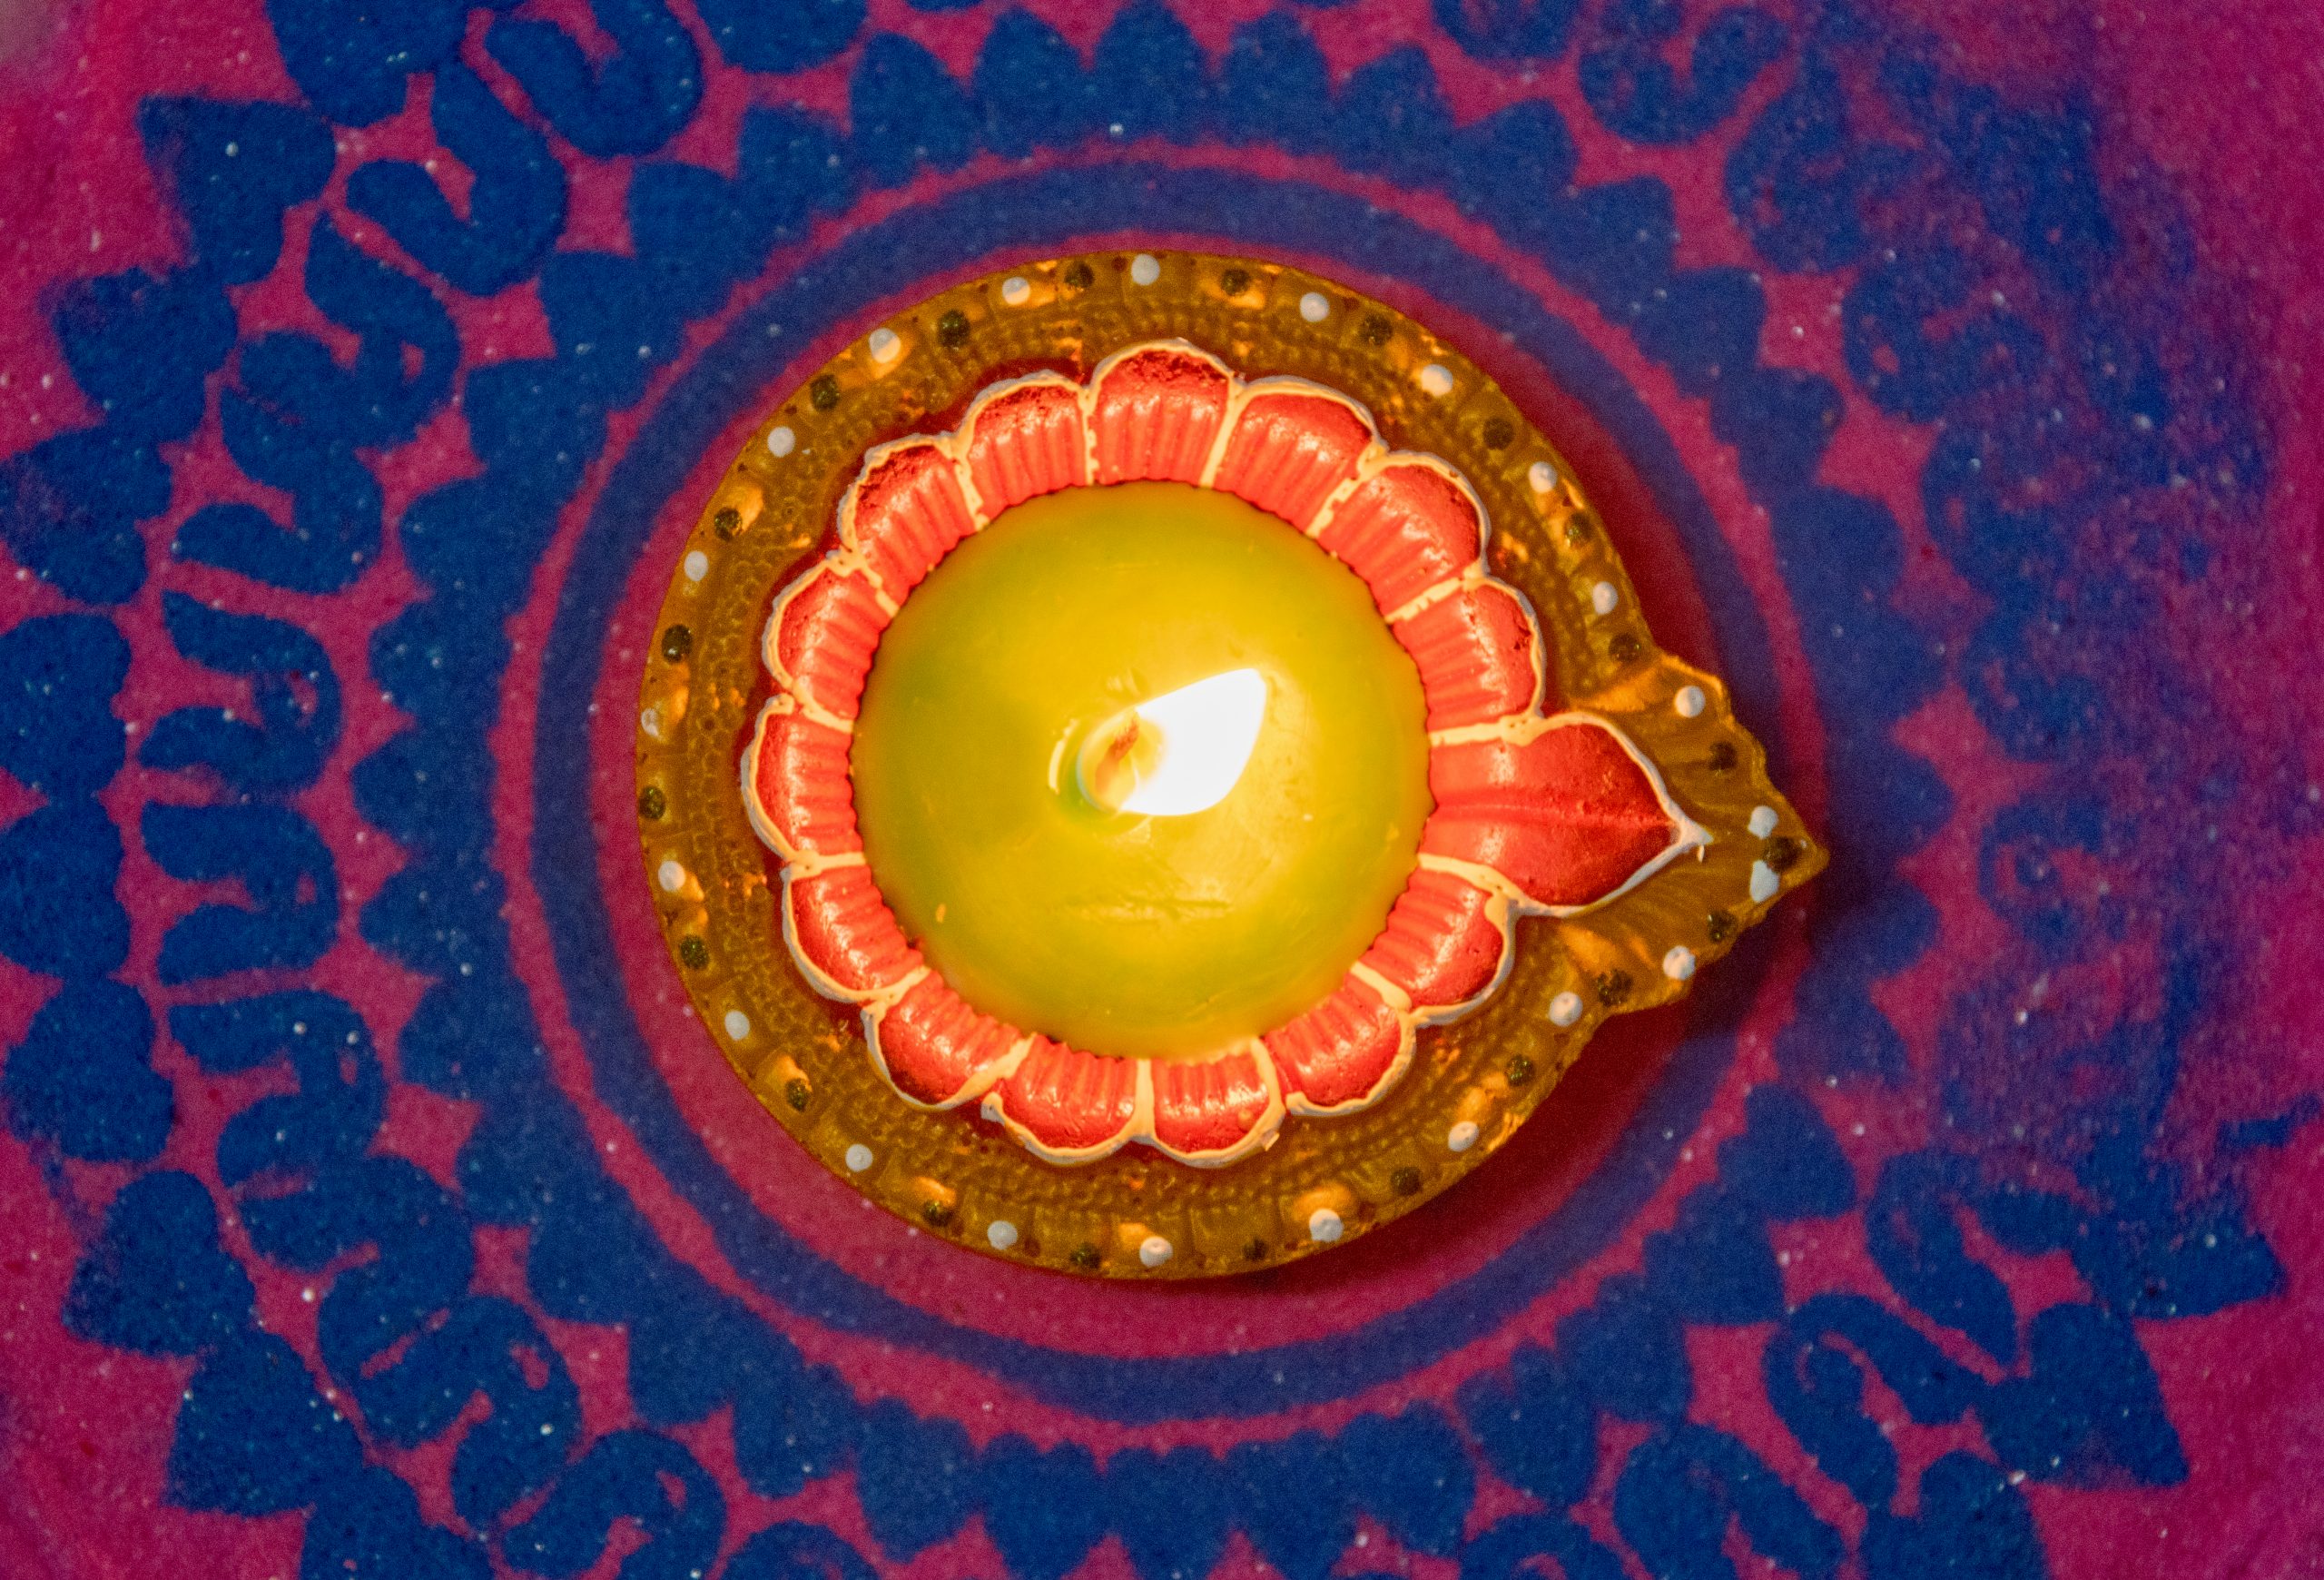 An oil lamp between a color design